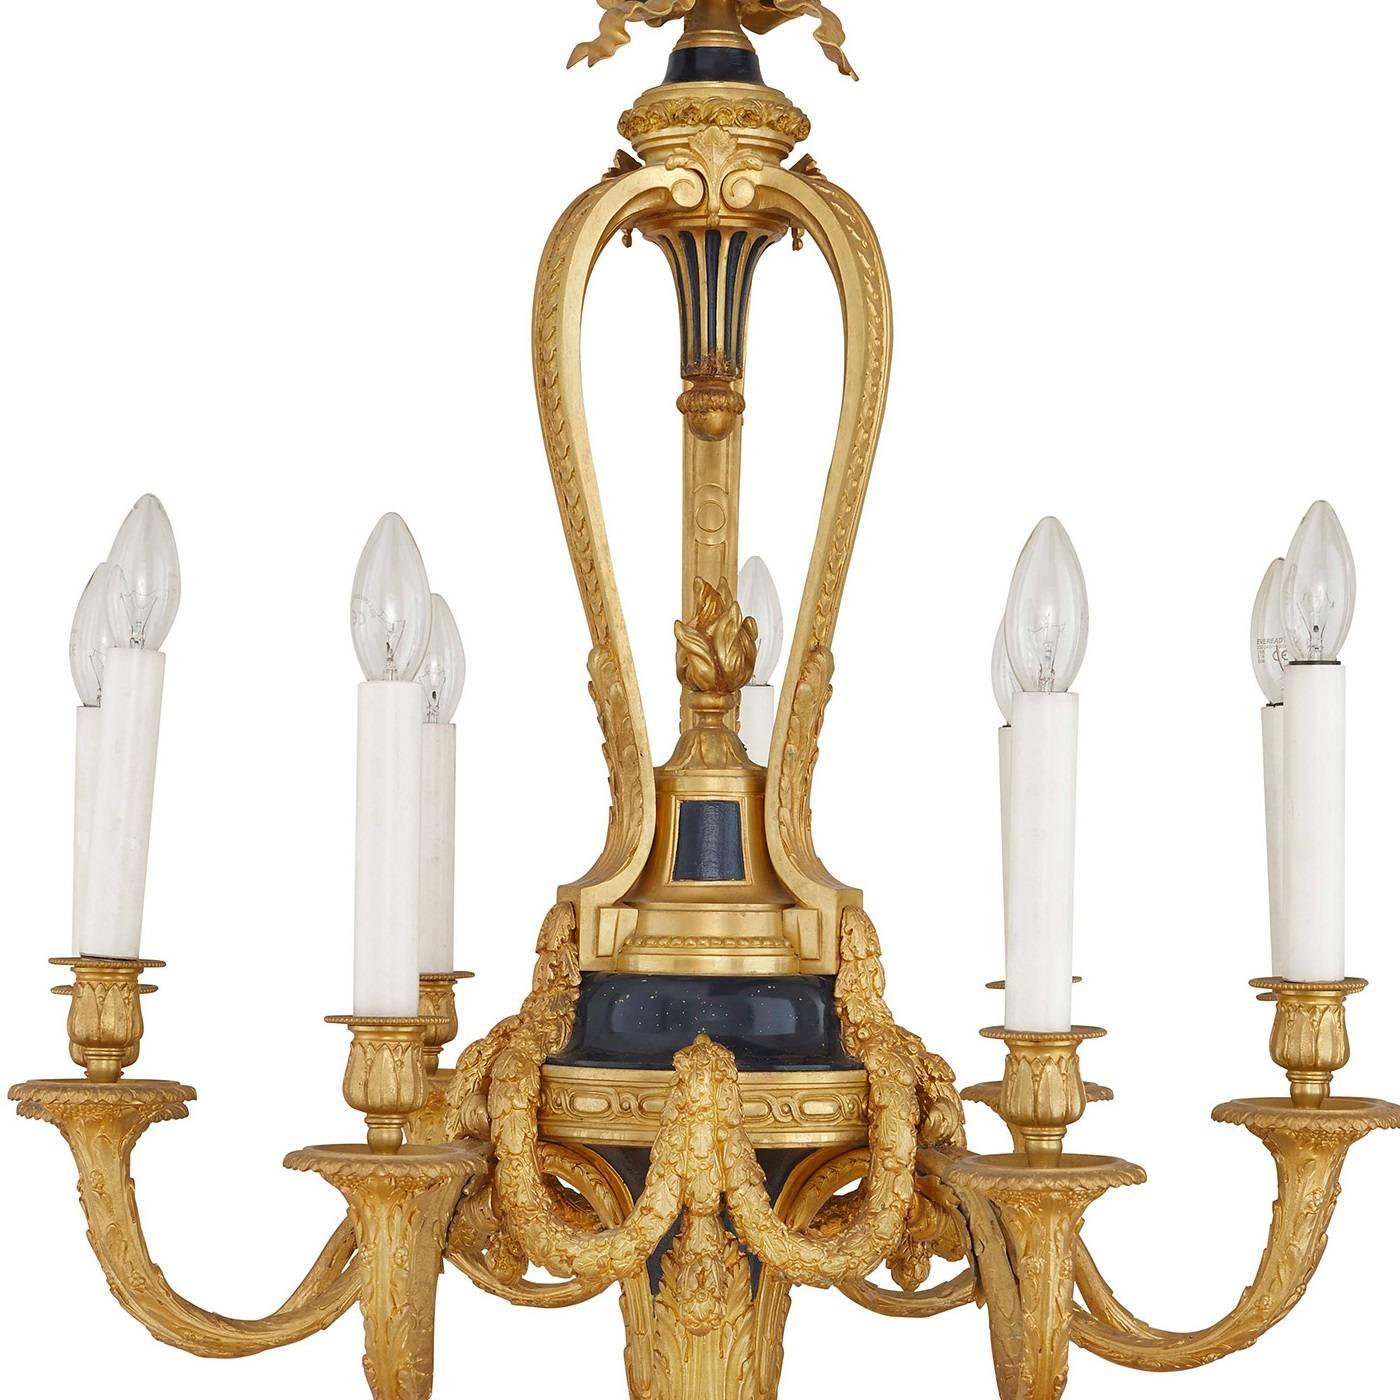 This elegant chandelier, decorated in the typical Belle Époque fashion, embodies the glamorous and luxurious lifestyle led by French nobility in early 20th century Paris. The nine ormolu branches are decorated with delicate foliate motifs and